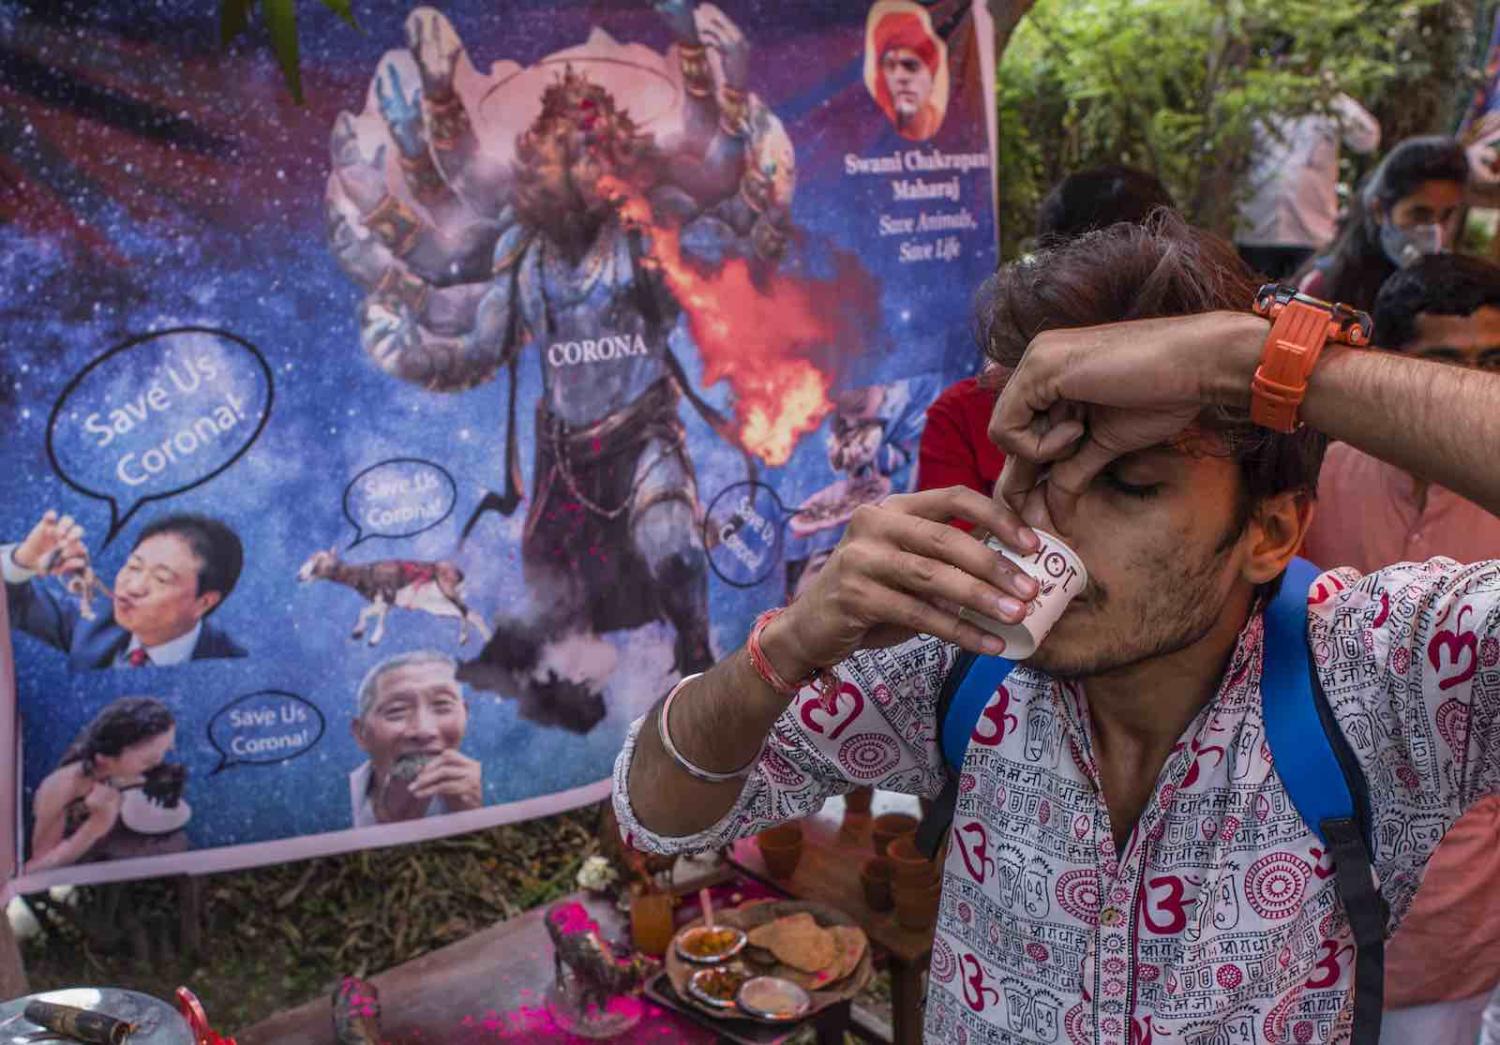  A urine drinking party to cure coronavirus infection, hosted by the Hindu organisation Akhil Bharat Hindu Mahasabha, 14 March in New Delhi, India 